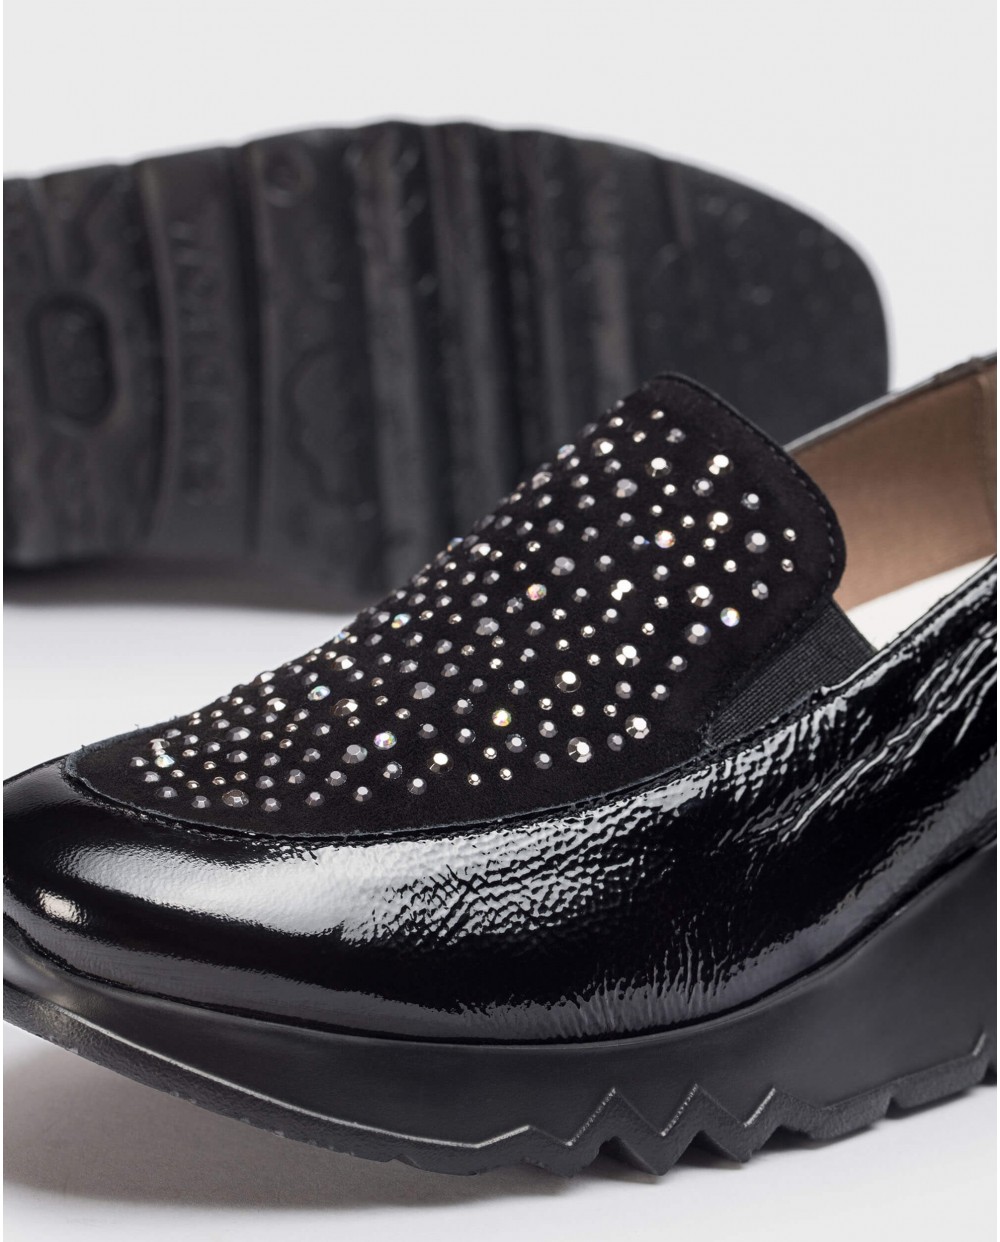 Wonders-Loafers and ballerines-HARRISON stud moccasin